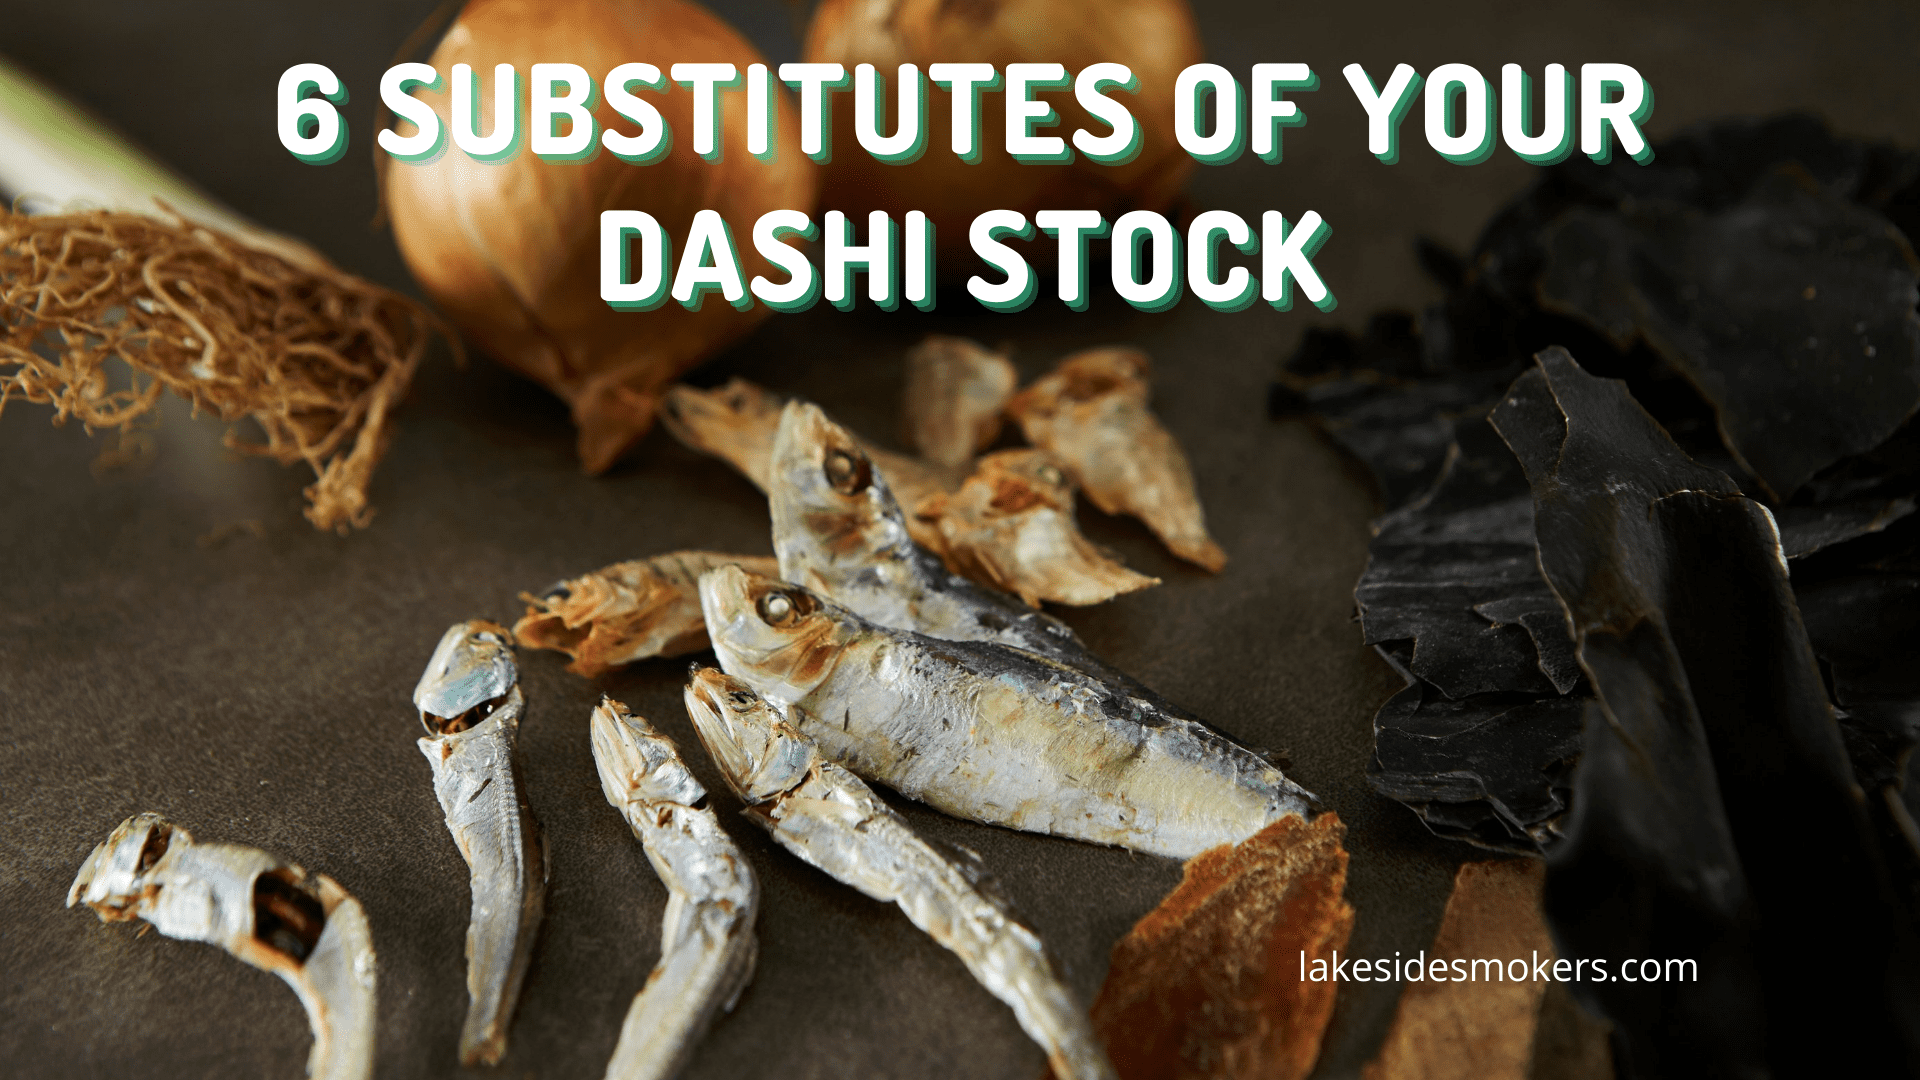 Don't have dashi stock? Use these 6 secret substitutes instead!